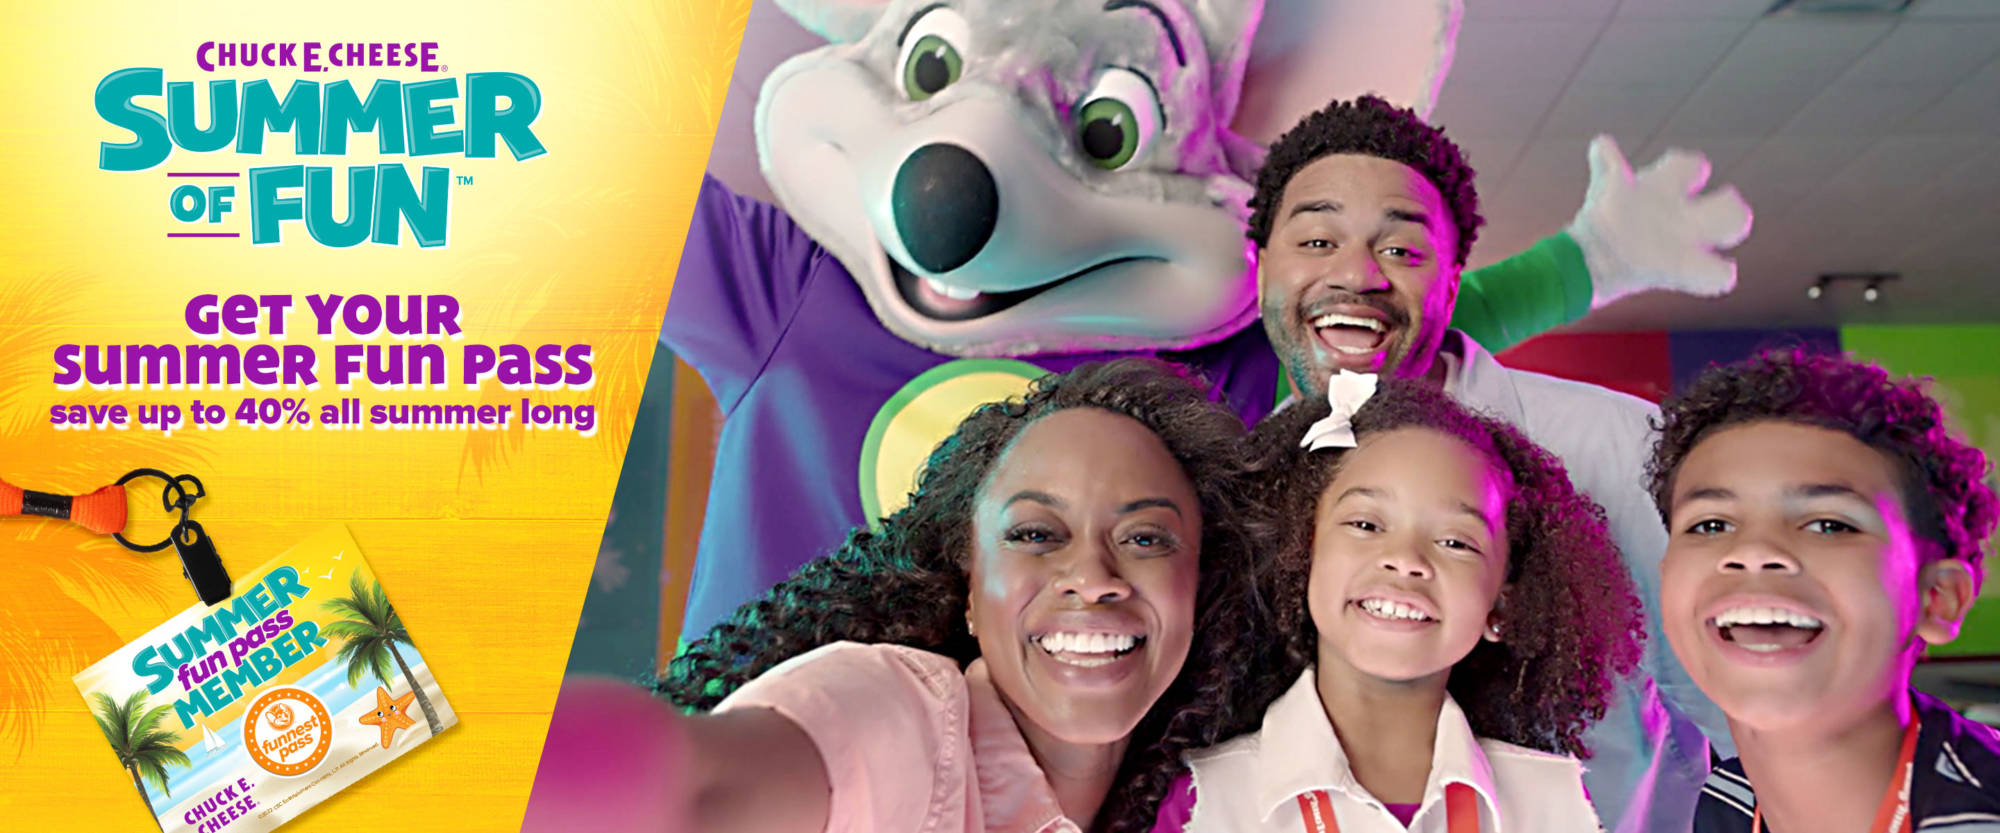 Chuck e Cheese Summer of Fun Get Your Summer Fun Pass save up to 40% all summer long